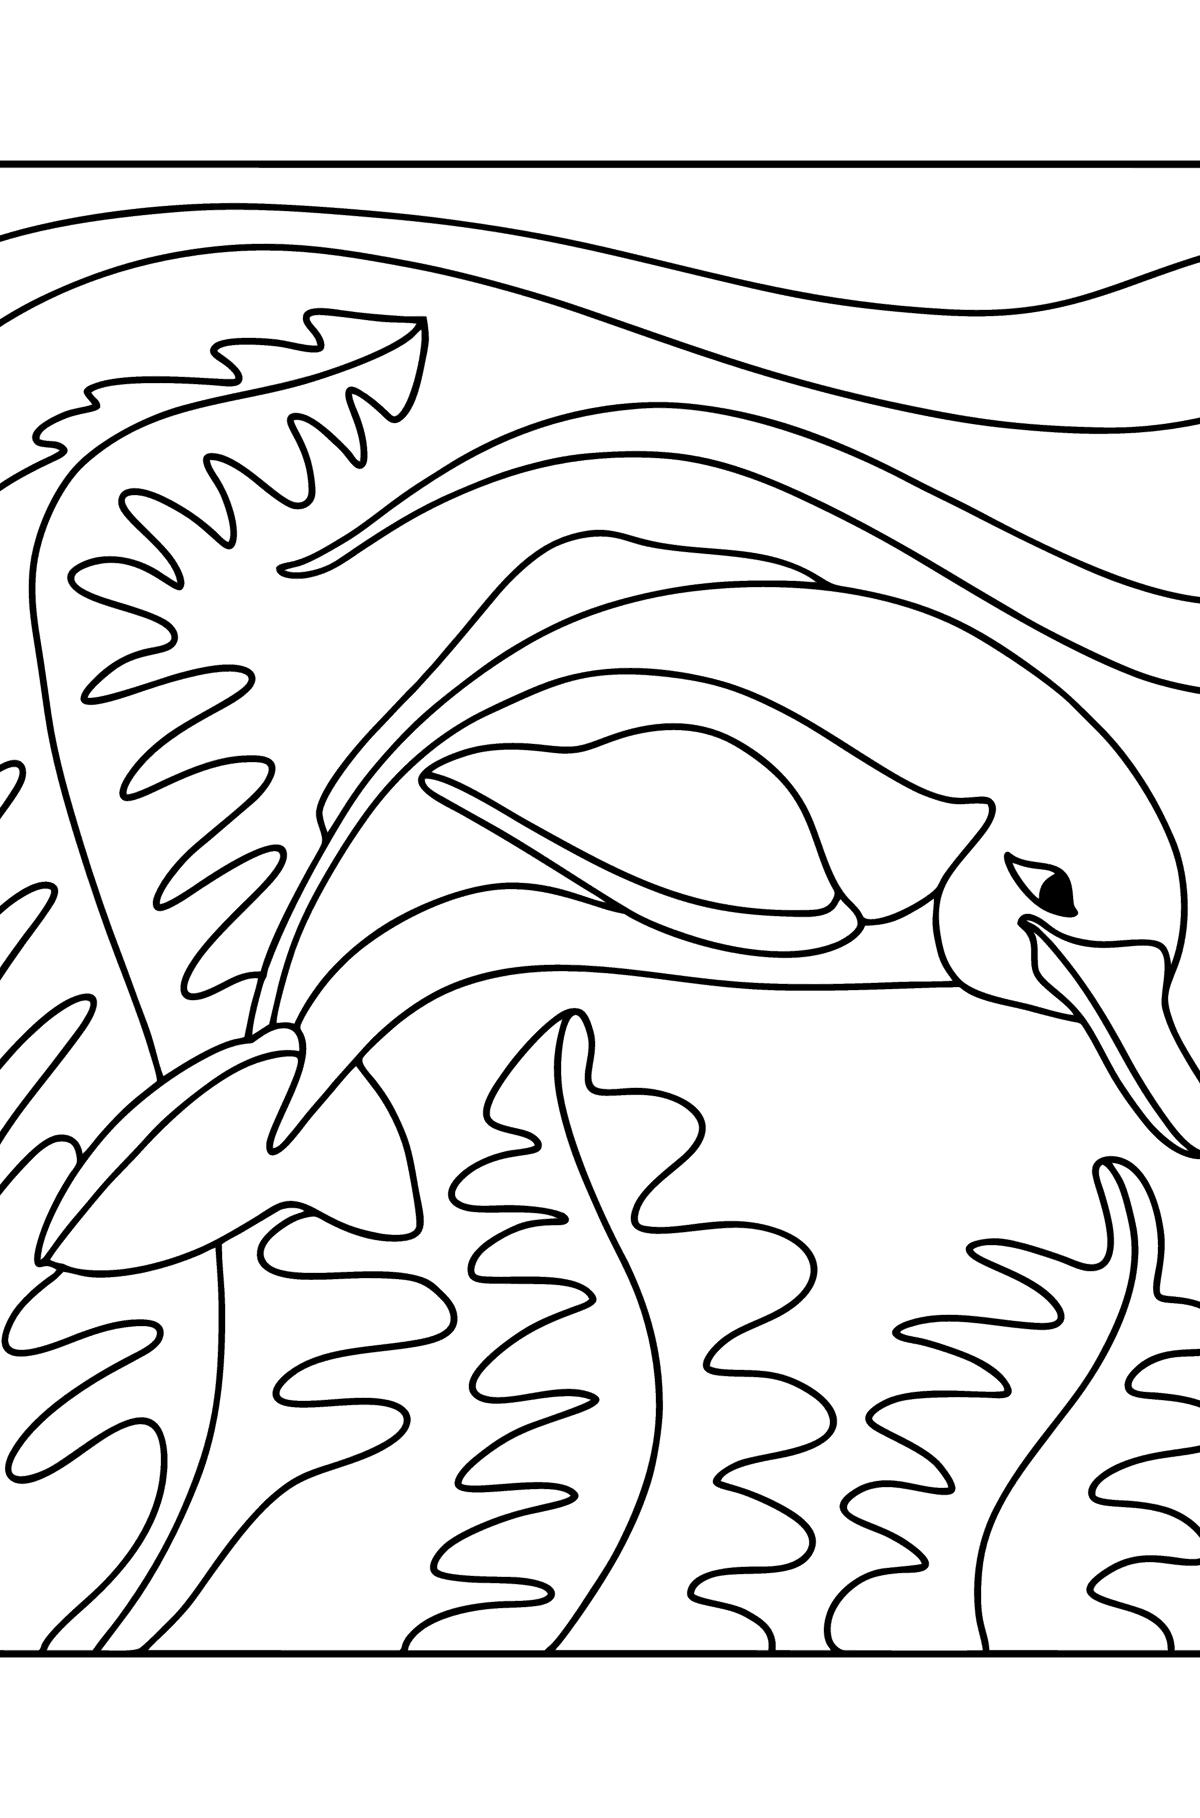 Chinese River Dolphin coloring page - Coloring Pages for Kids